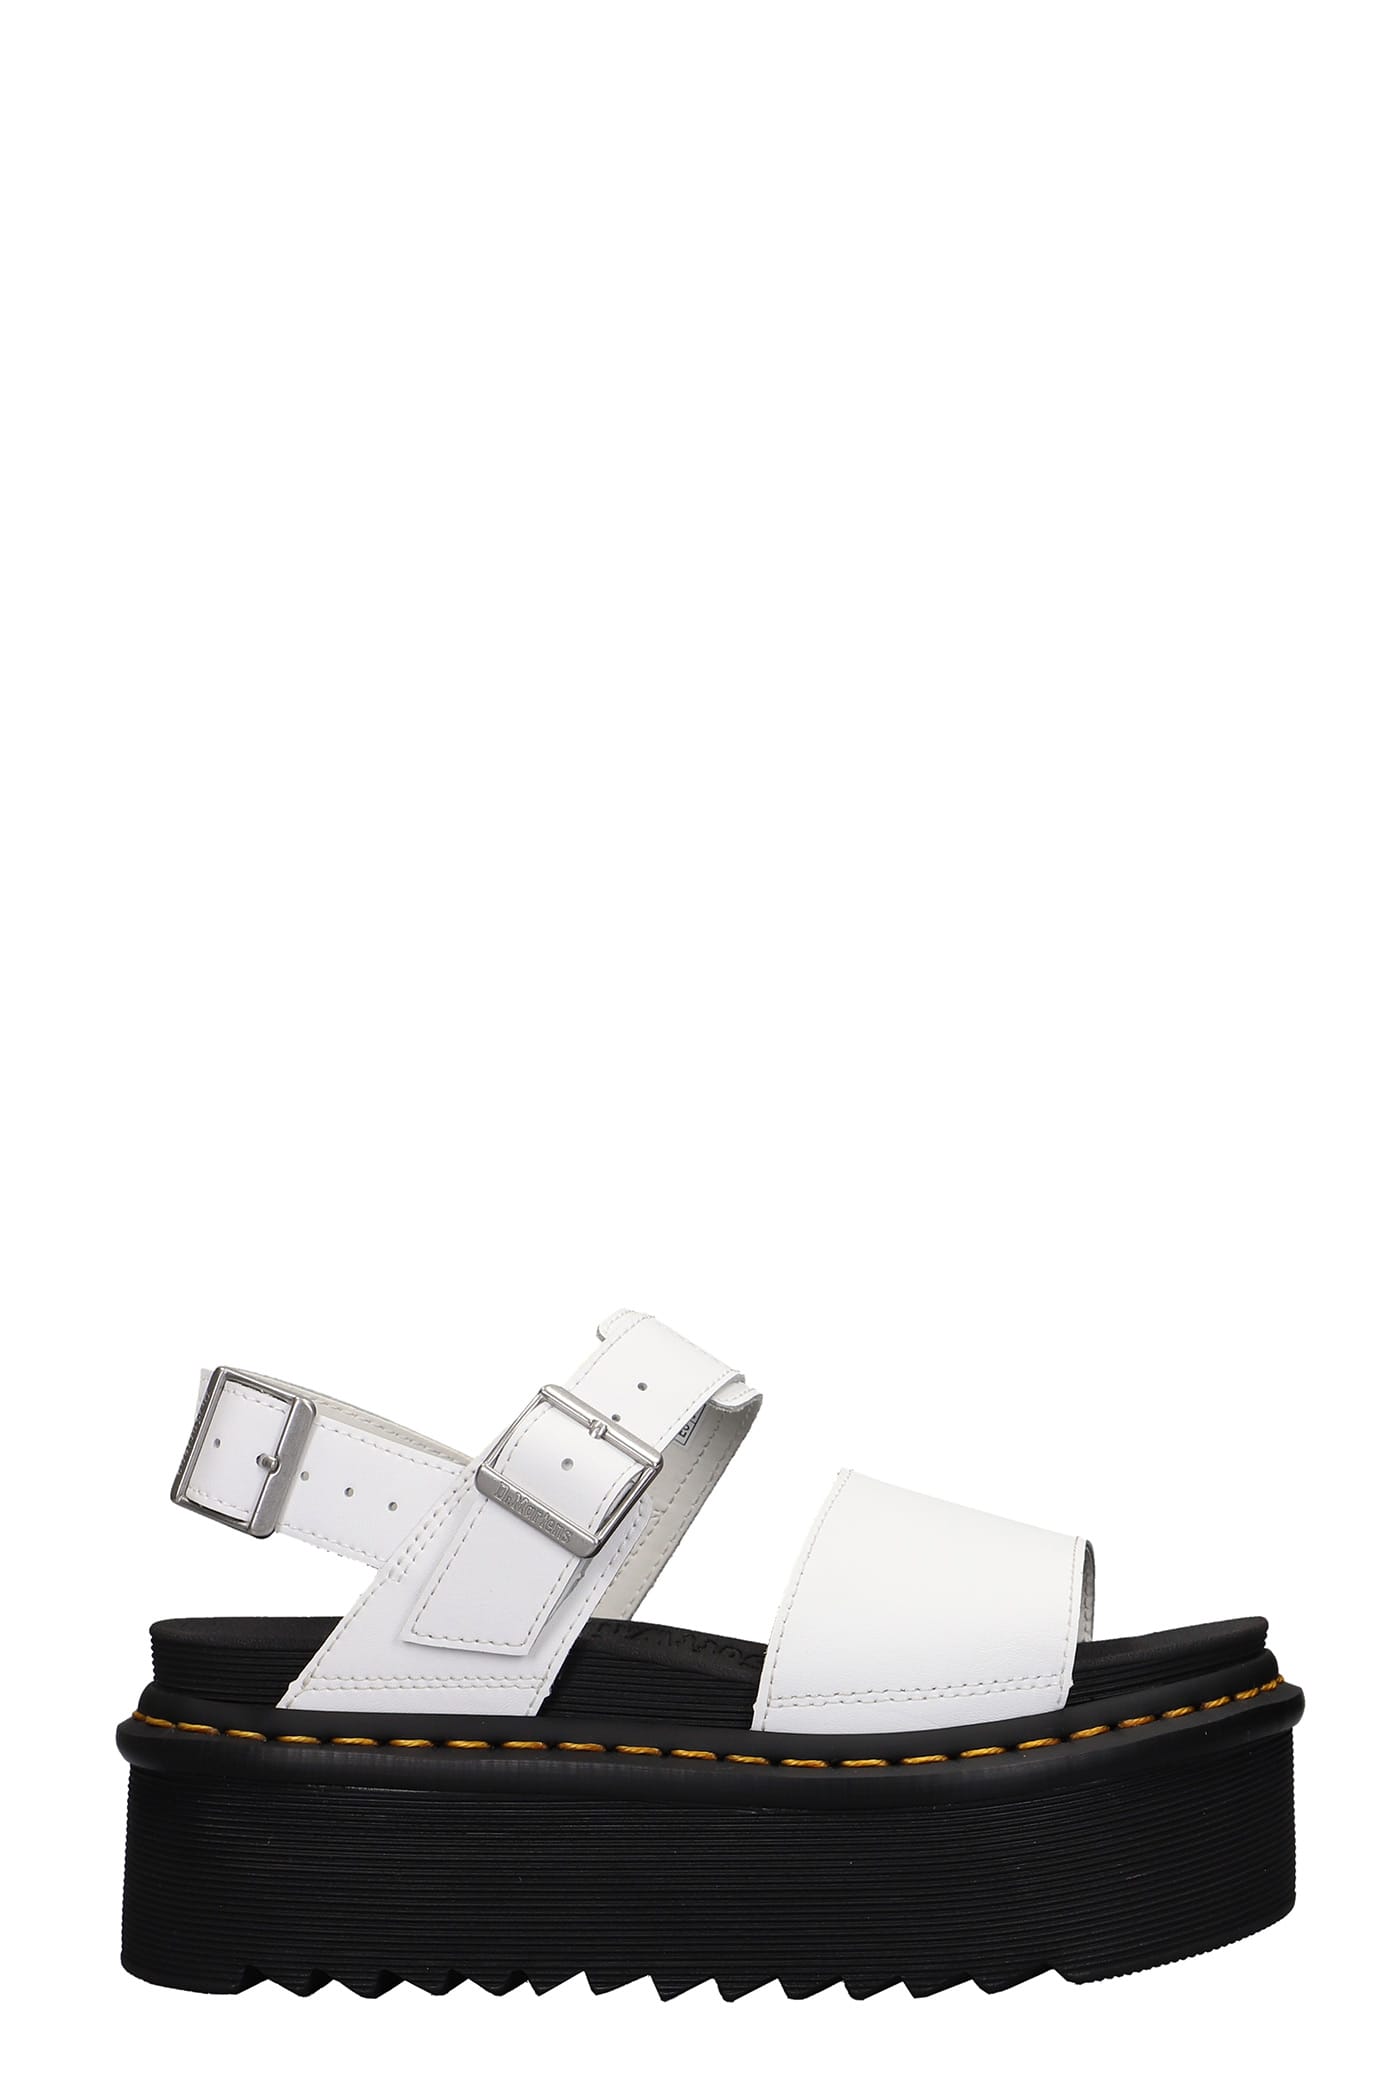 Dr. Martens Voss Quad Sandals In White Leather